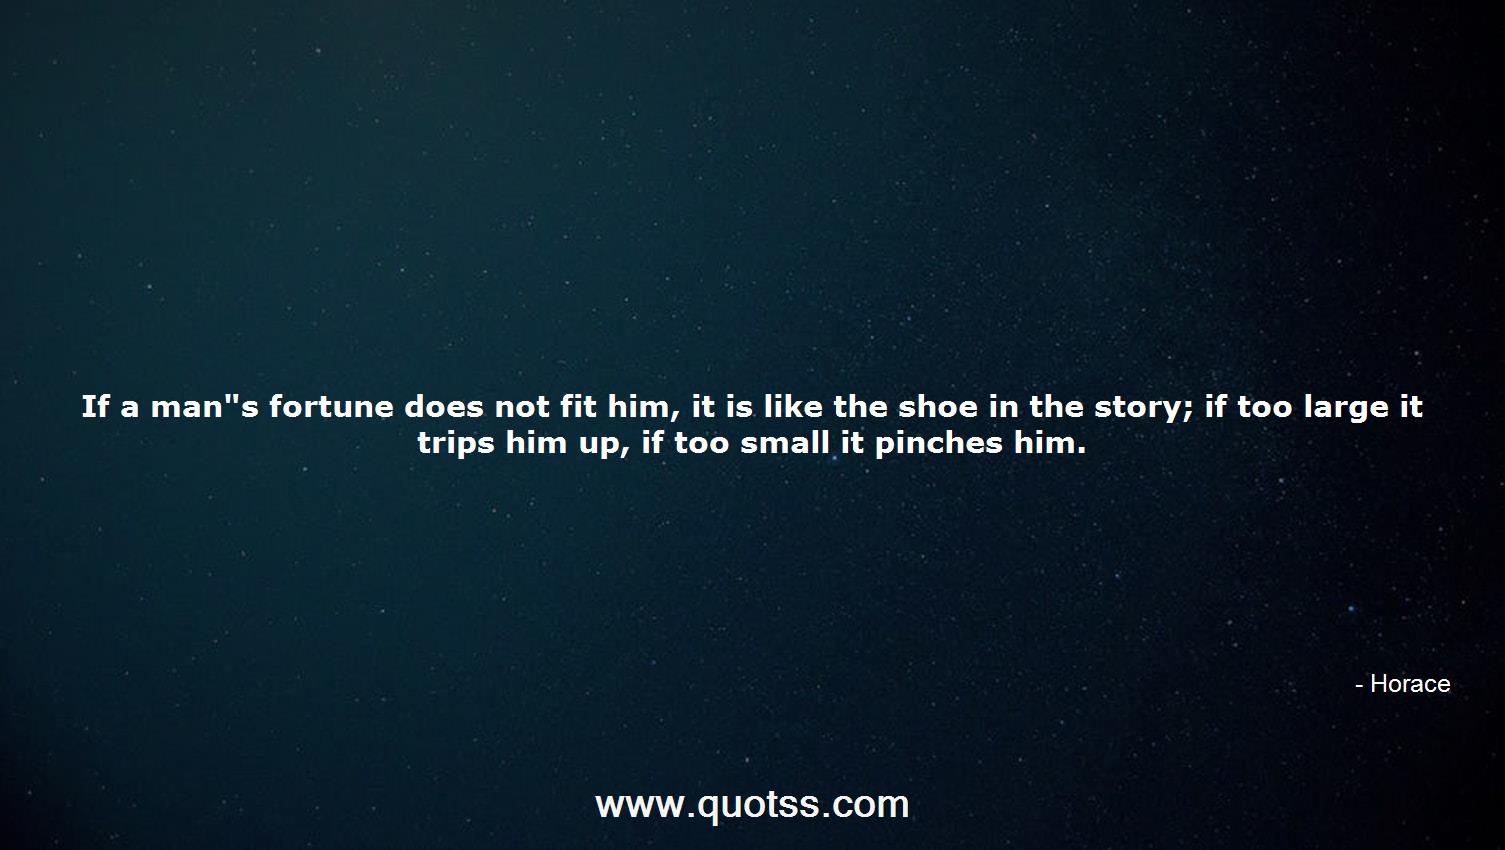 Horace Quote on Quotss